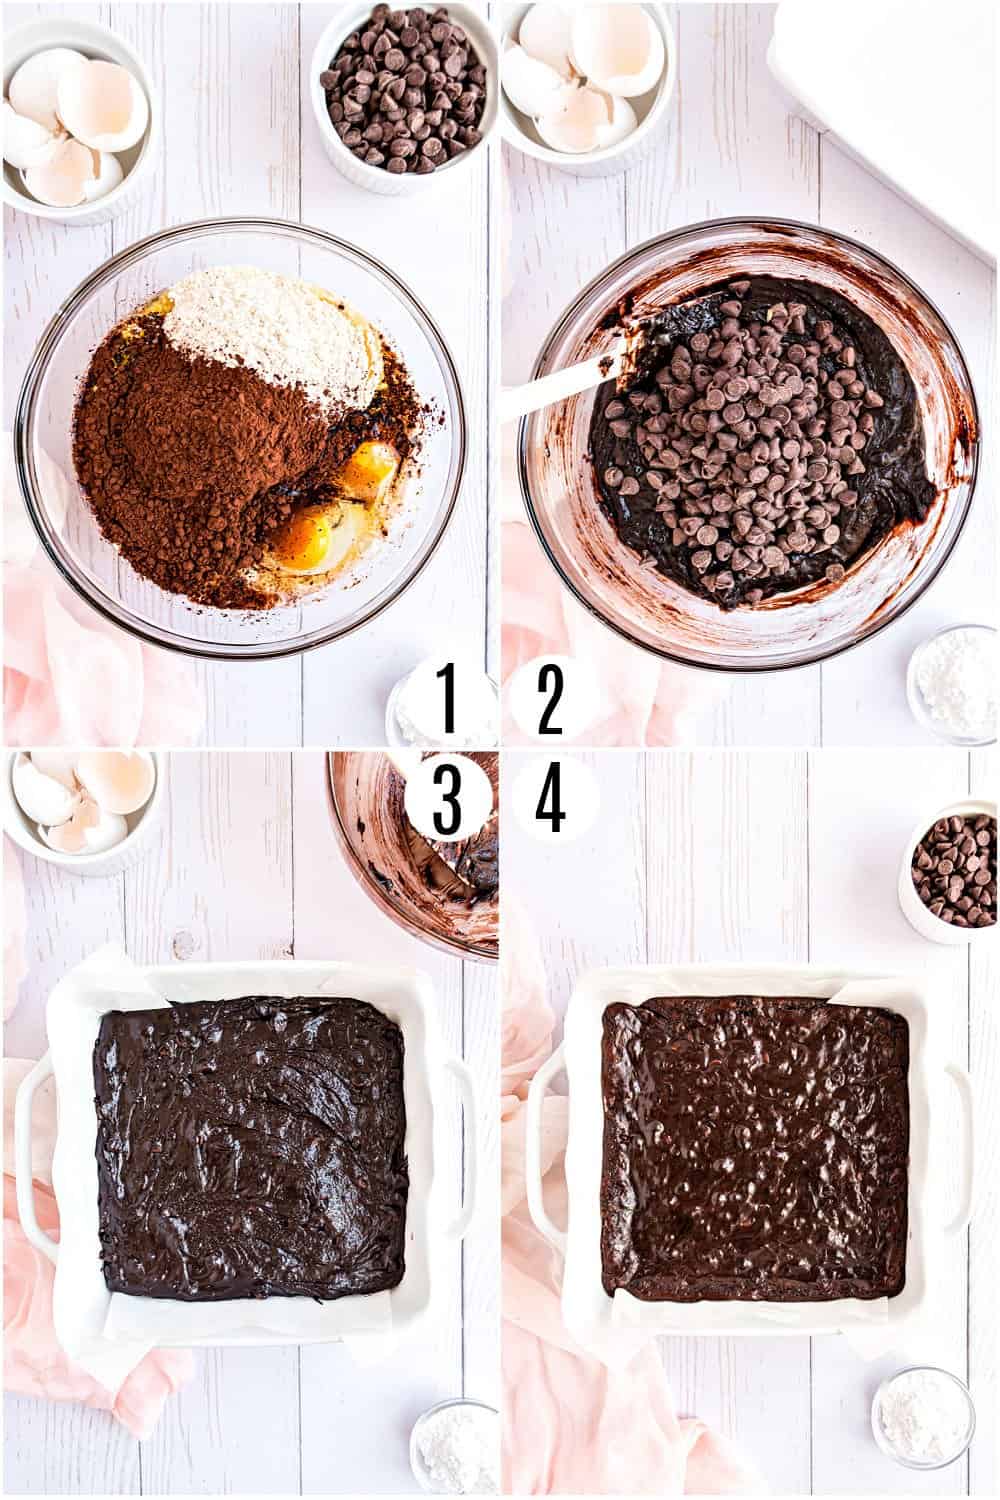 Step by step photos showing how to make dark chocolate brownies.